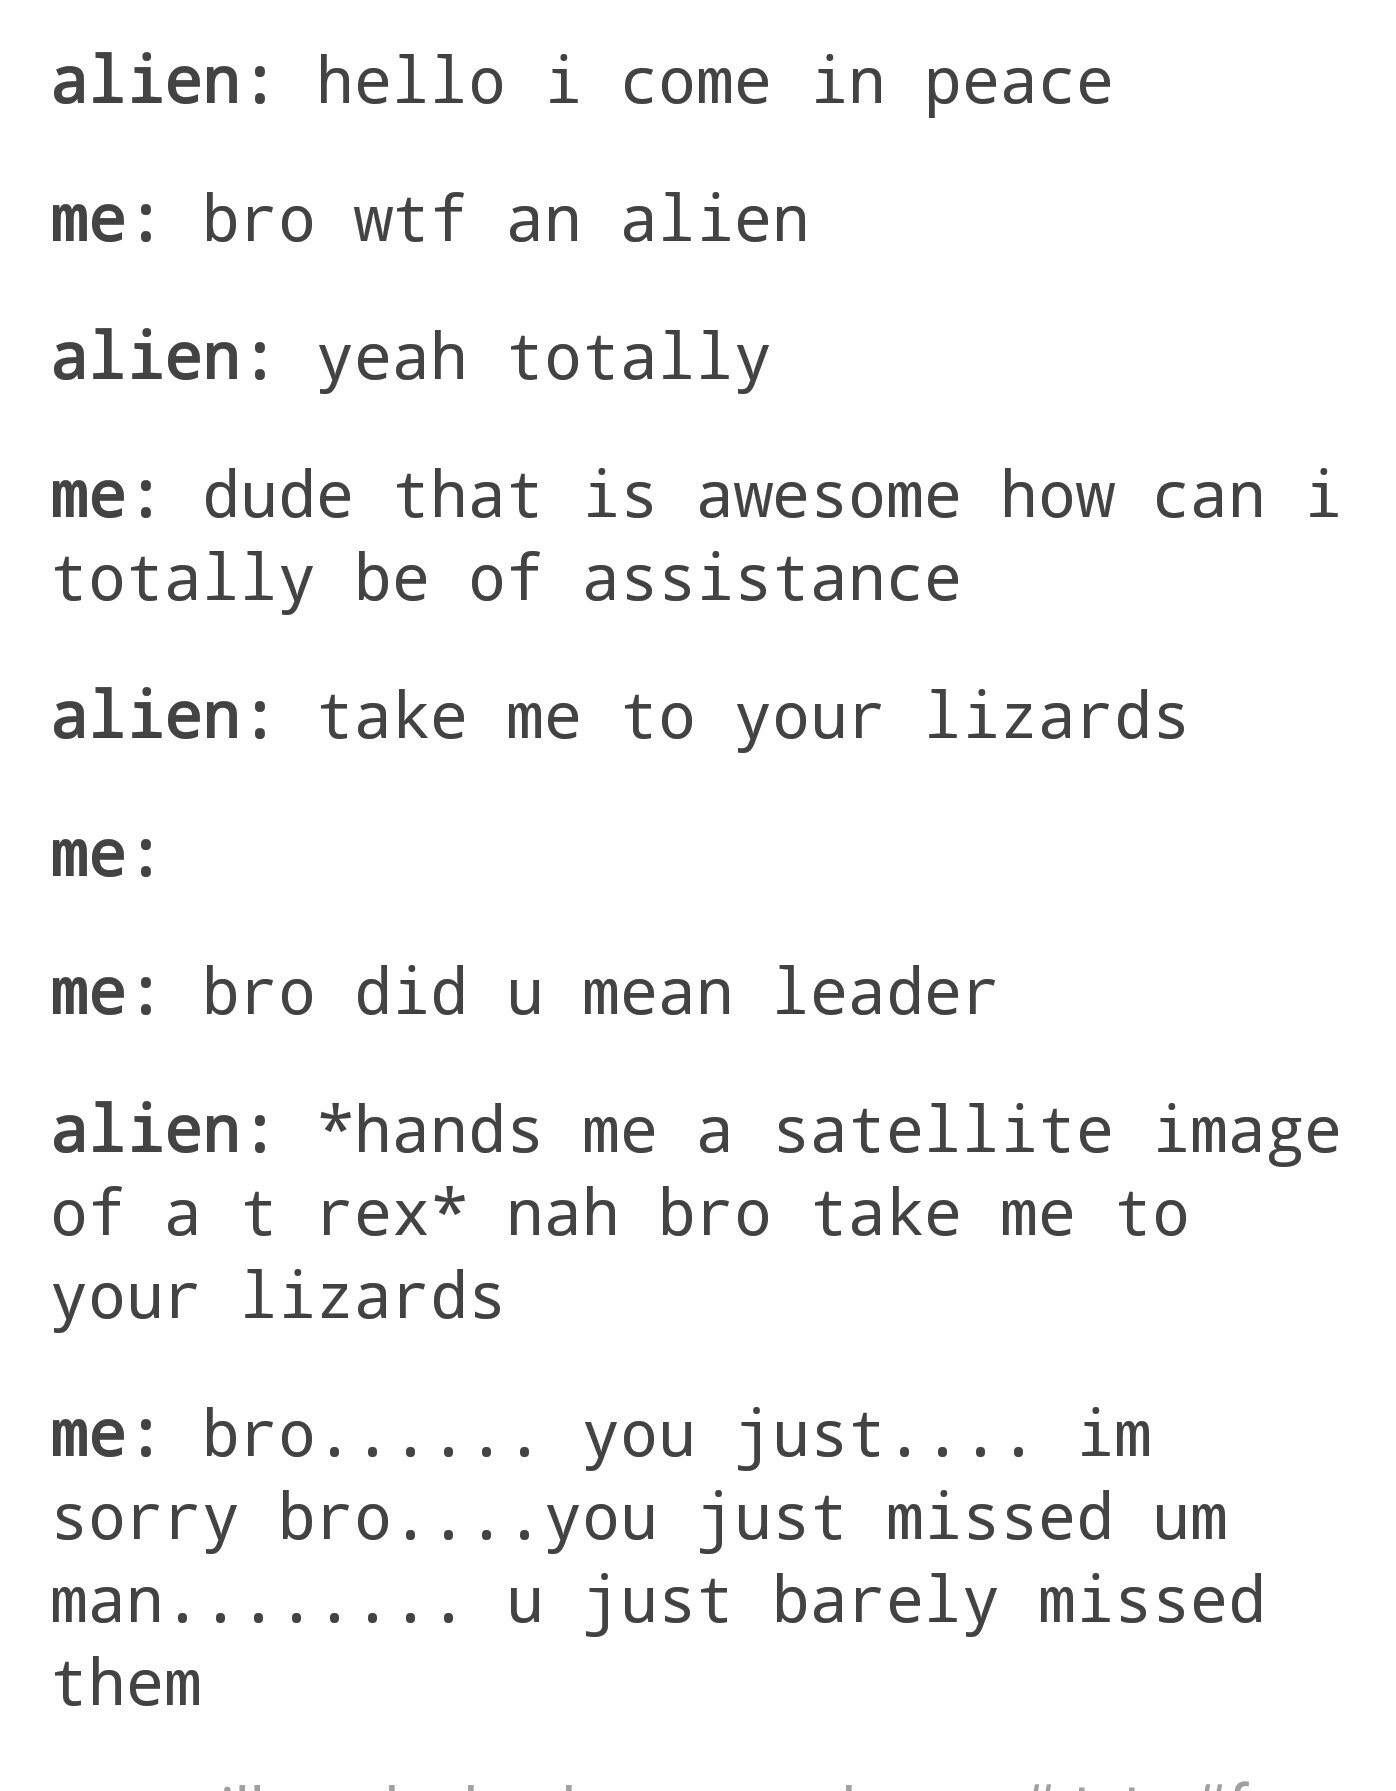 handwriting - alien hello i come in peace me bro wtf an alien alien yeah totally me dude that is awesome how can i totally be of assistance alien take me to your lizards me me bro did u mean leader alien hands me a satellite image of a t rex nah bro take 